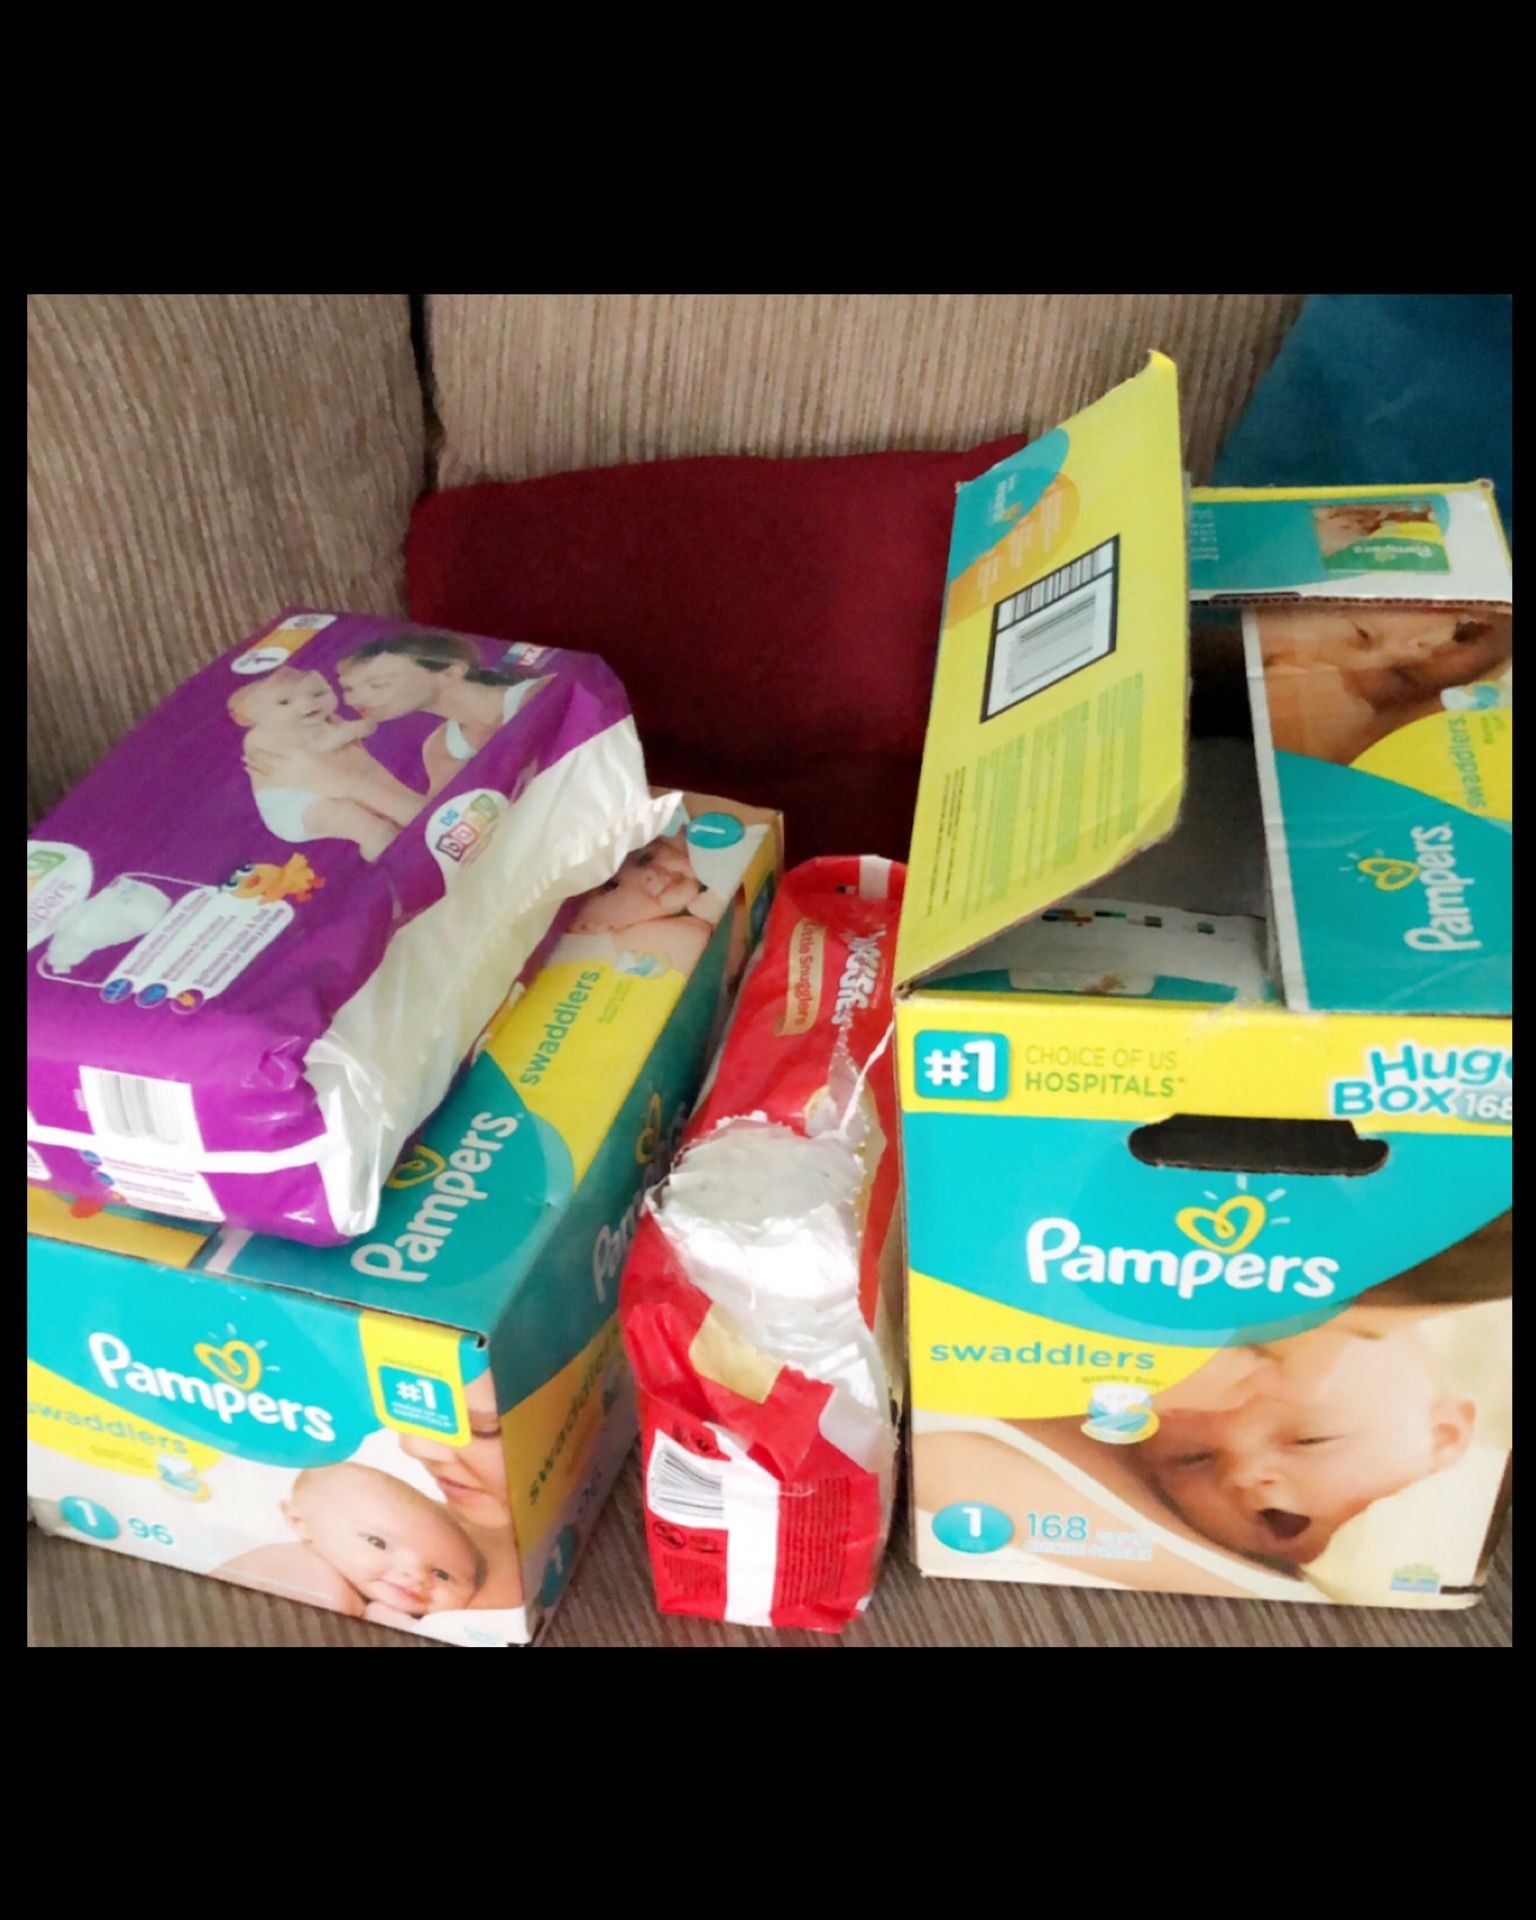 Pampers (diapers)